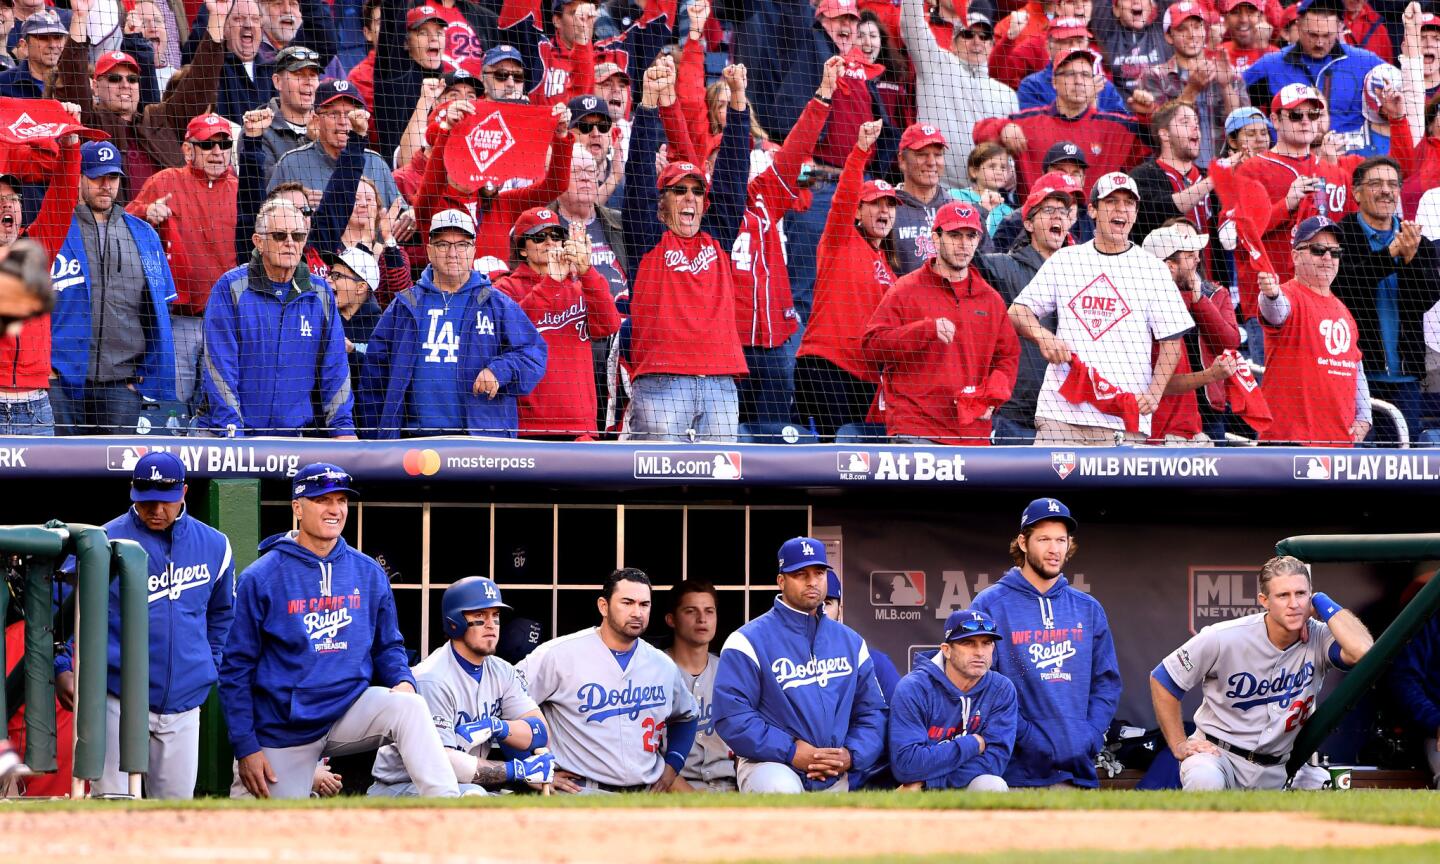 Fans celebrate at the end of the game as members of the Dodgers look on in Game 2.